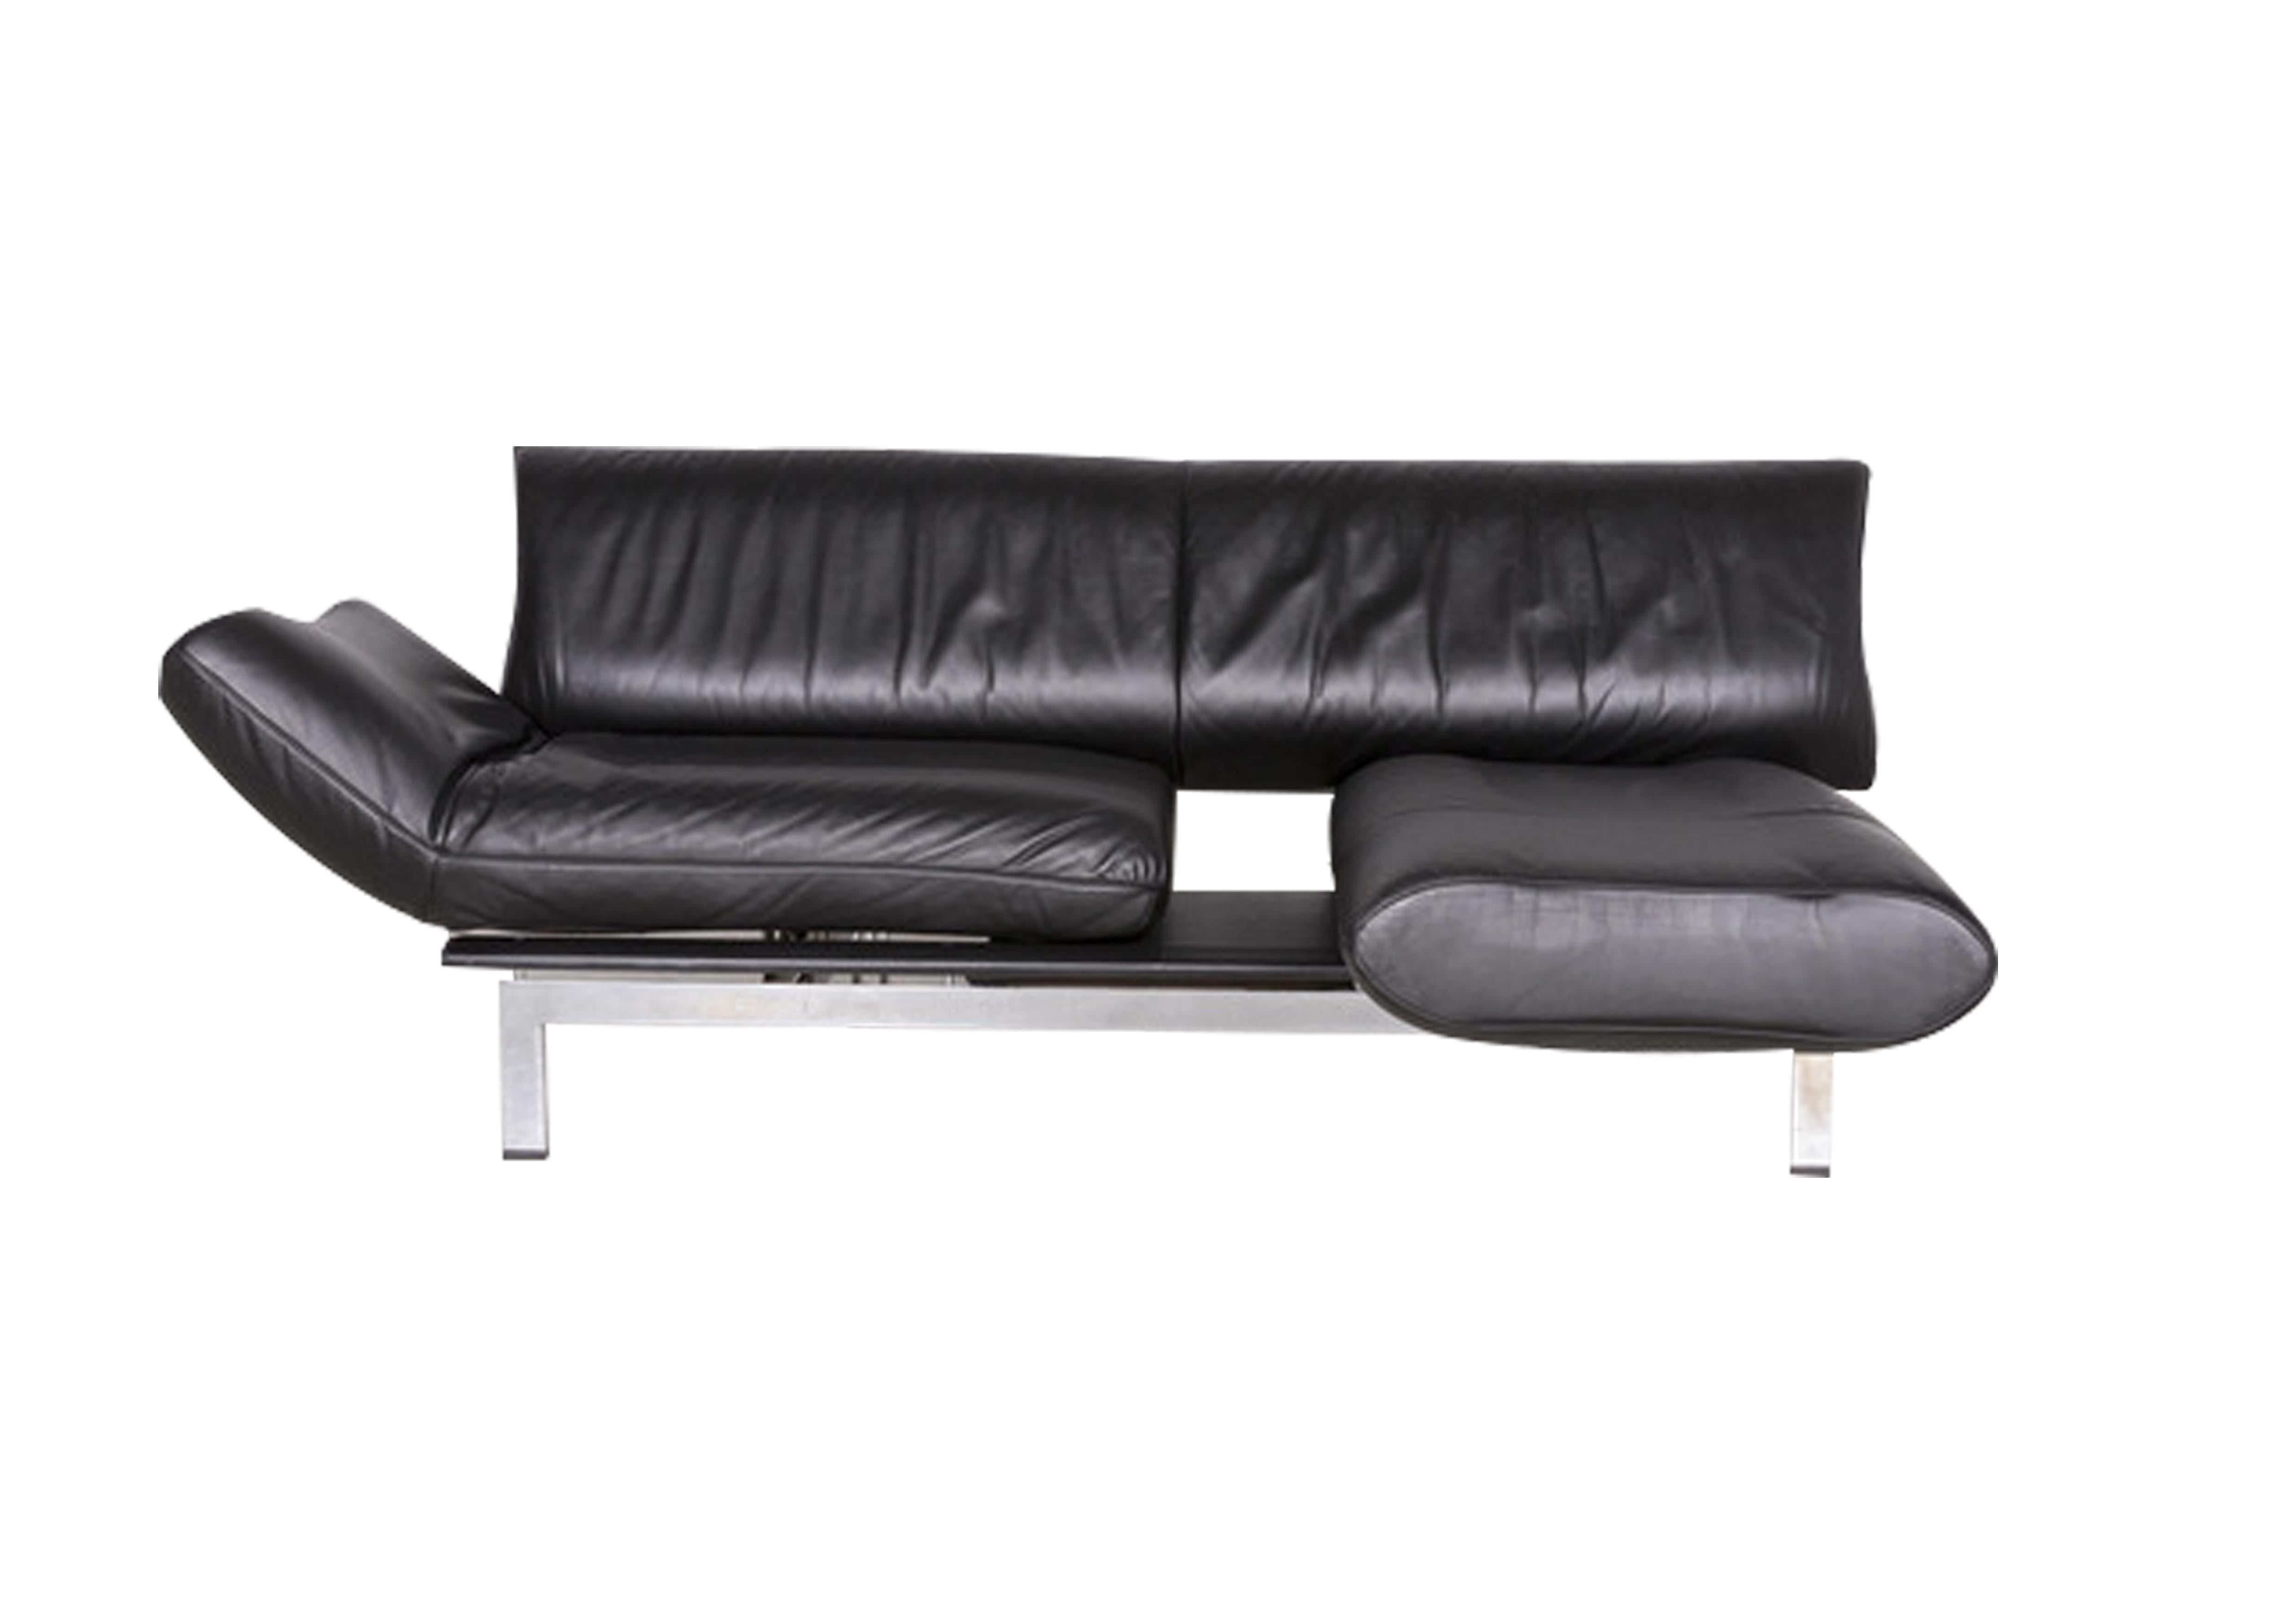 Modern Reto Frigg DS140 Two Seater Leather Modular Sofa for De Sede, Switzerland 1985